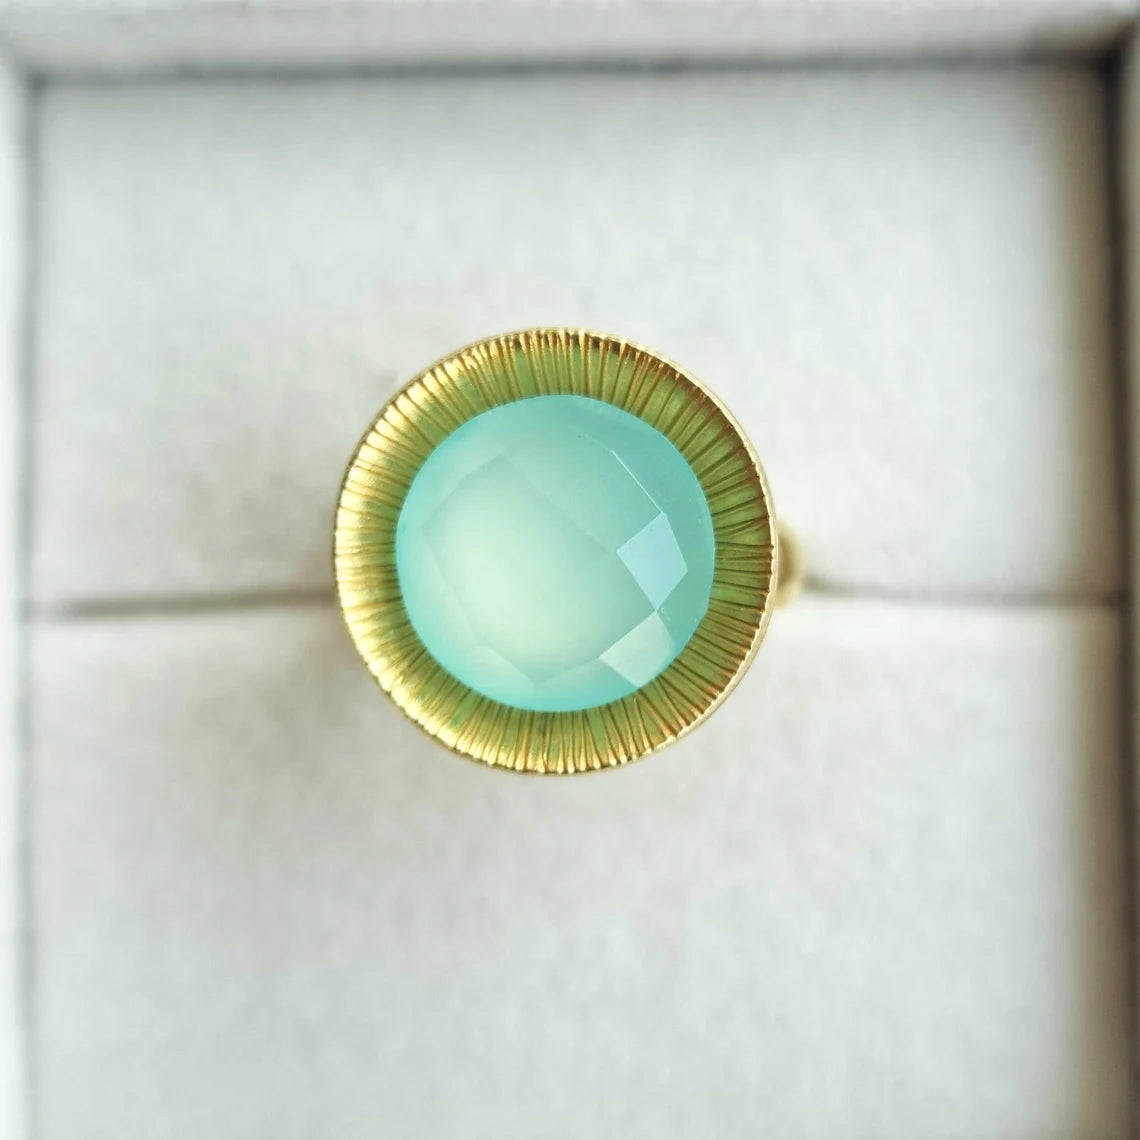 Aqua Blue Chalcedony 925 Sterling Silver Ring with Gold Plated, Gemstone Ring, Stacking Ring, Round Checker Cut Ring